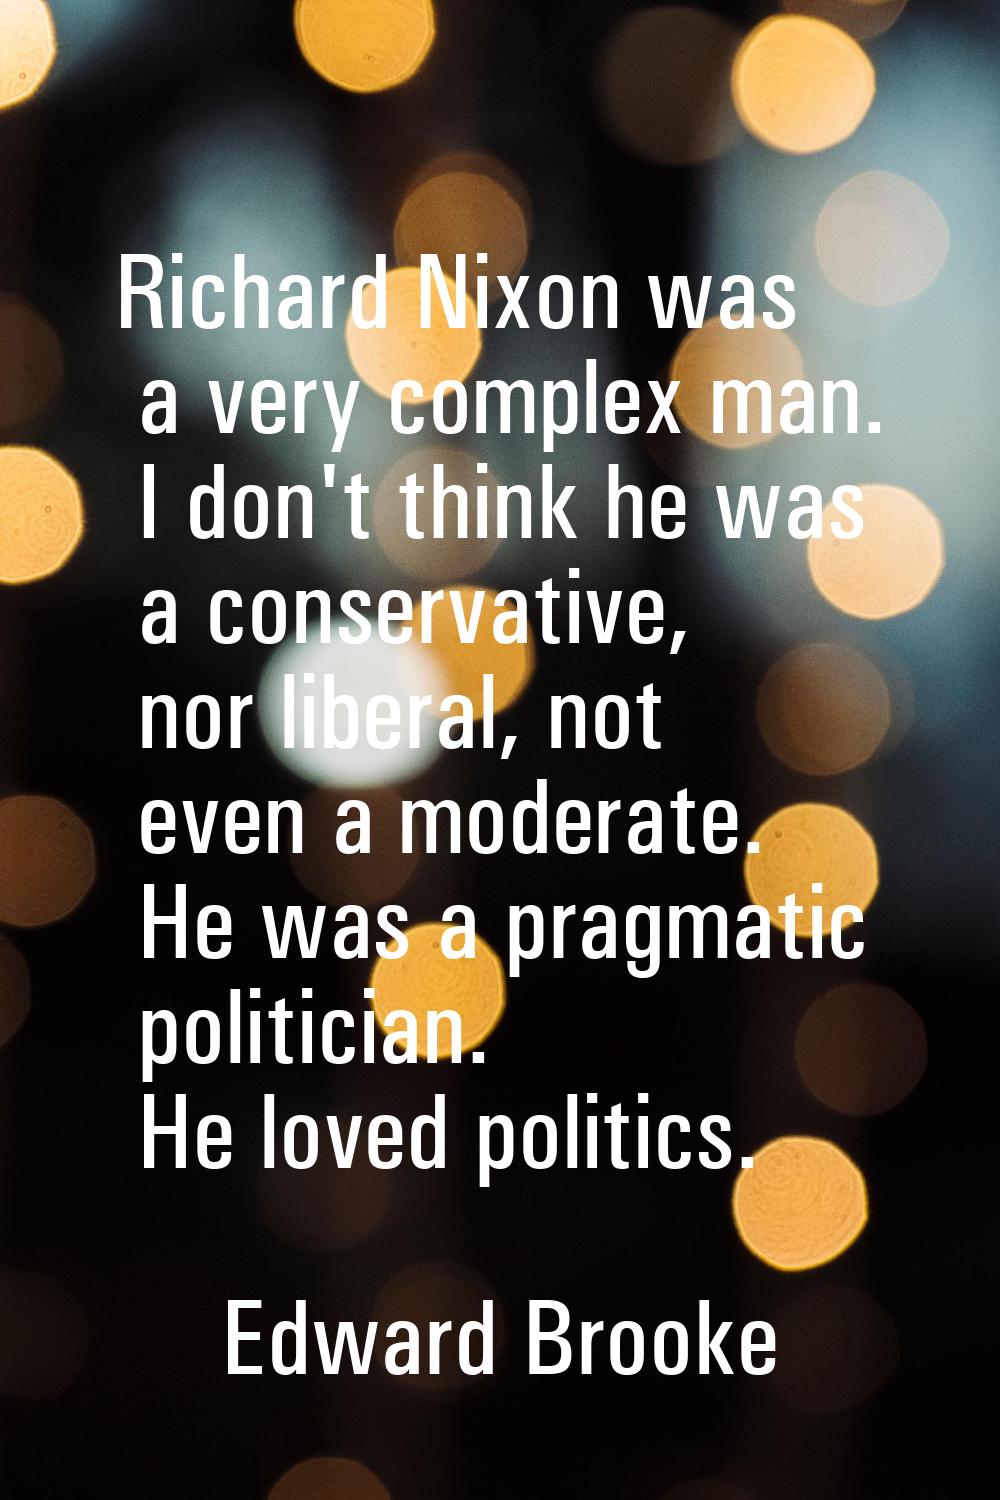 Richard Nixon was a very complex man. I don't think he was a conservative, nor liberal, not even a 